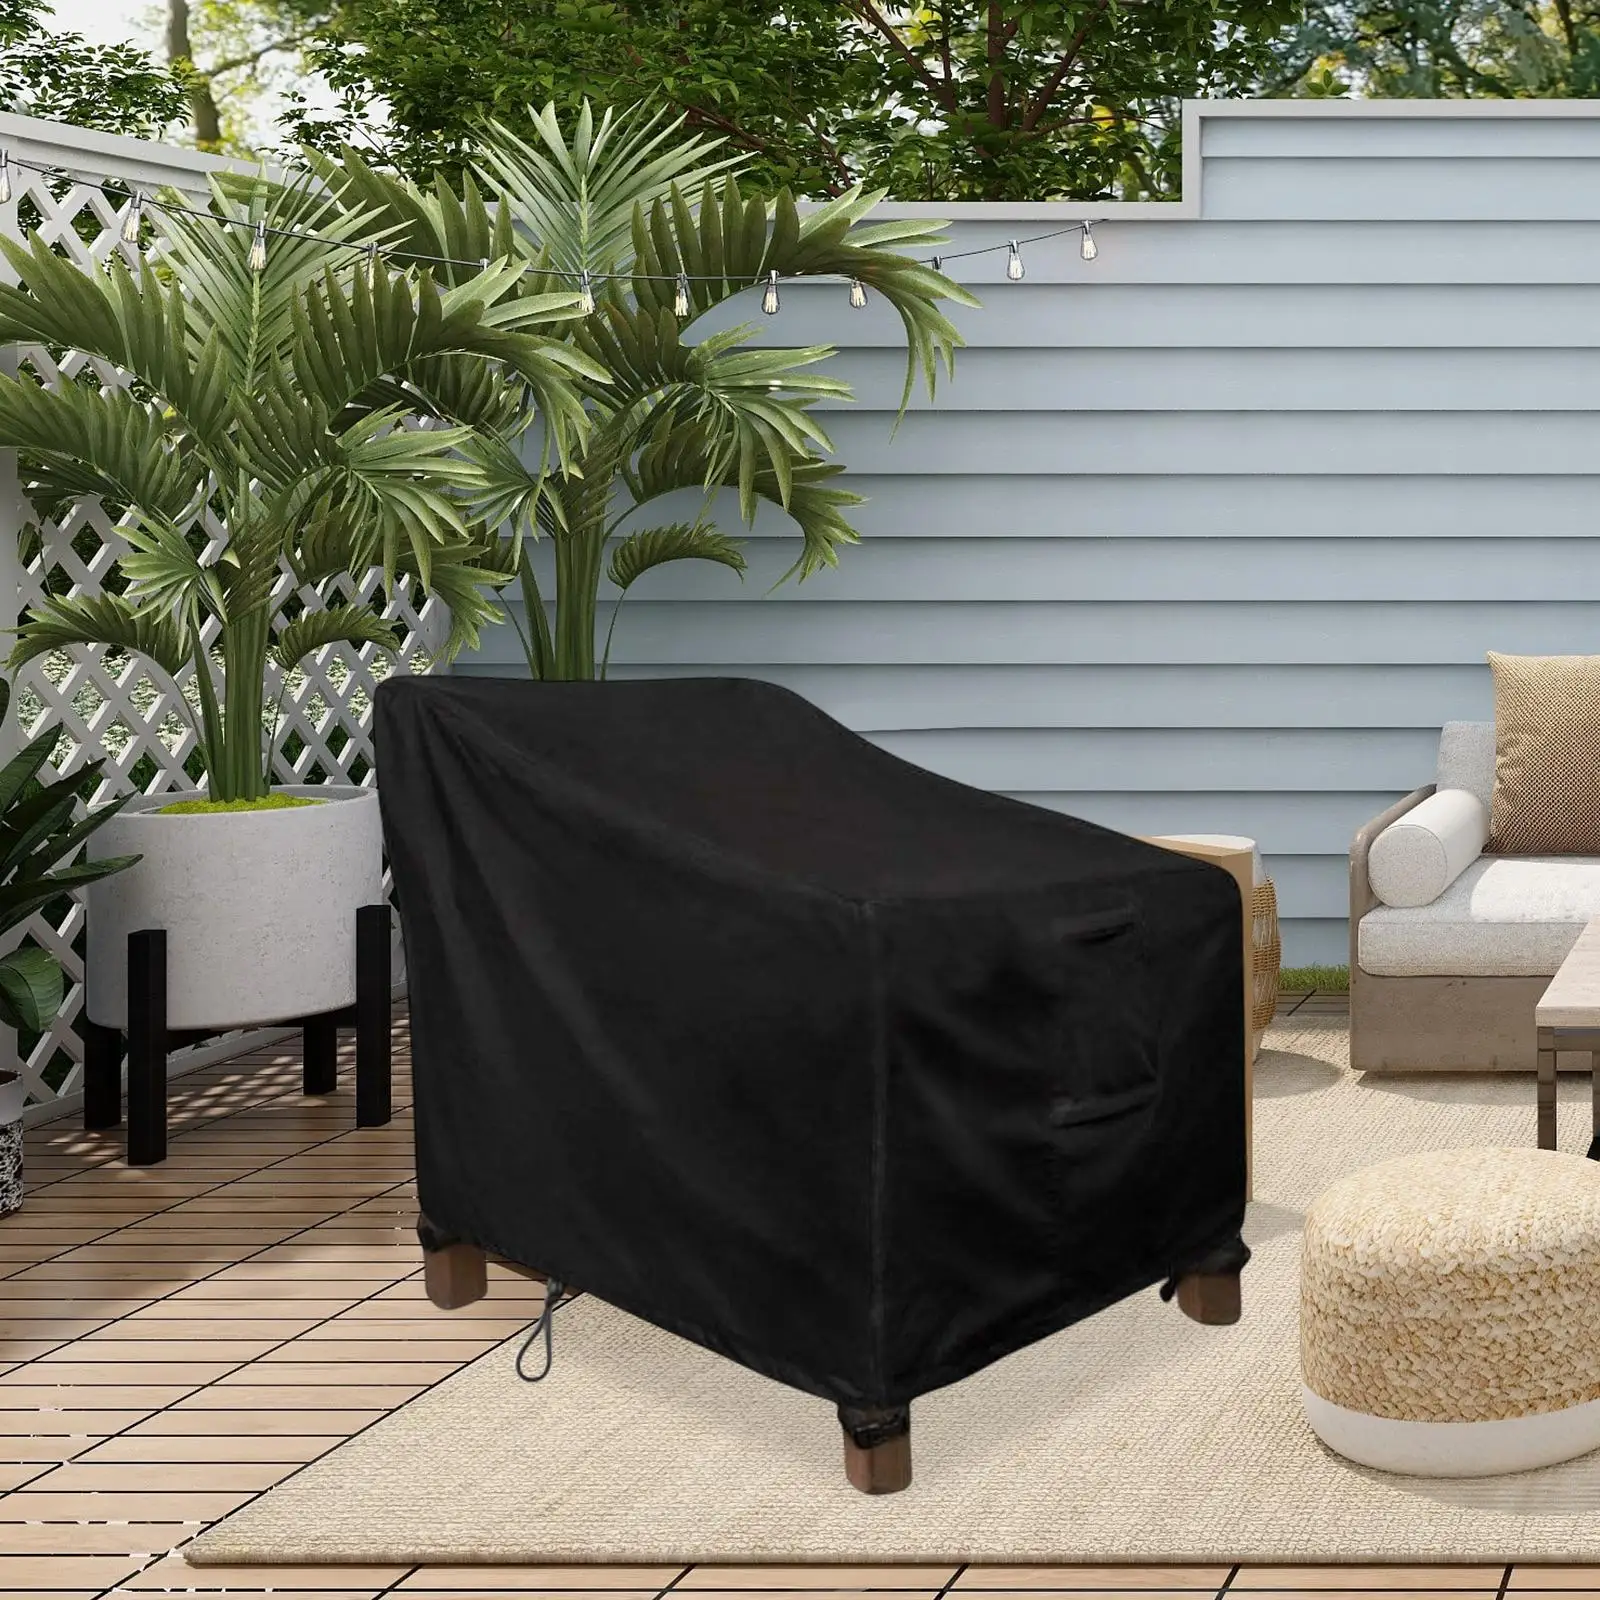 High Back Patio Chair Cover, Lounge Deep Seat Cover Heavy Duty Garden Furniture